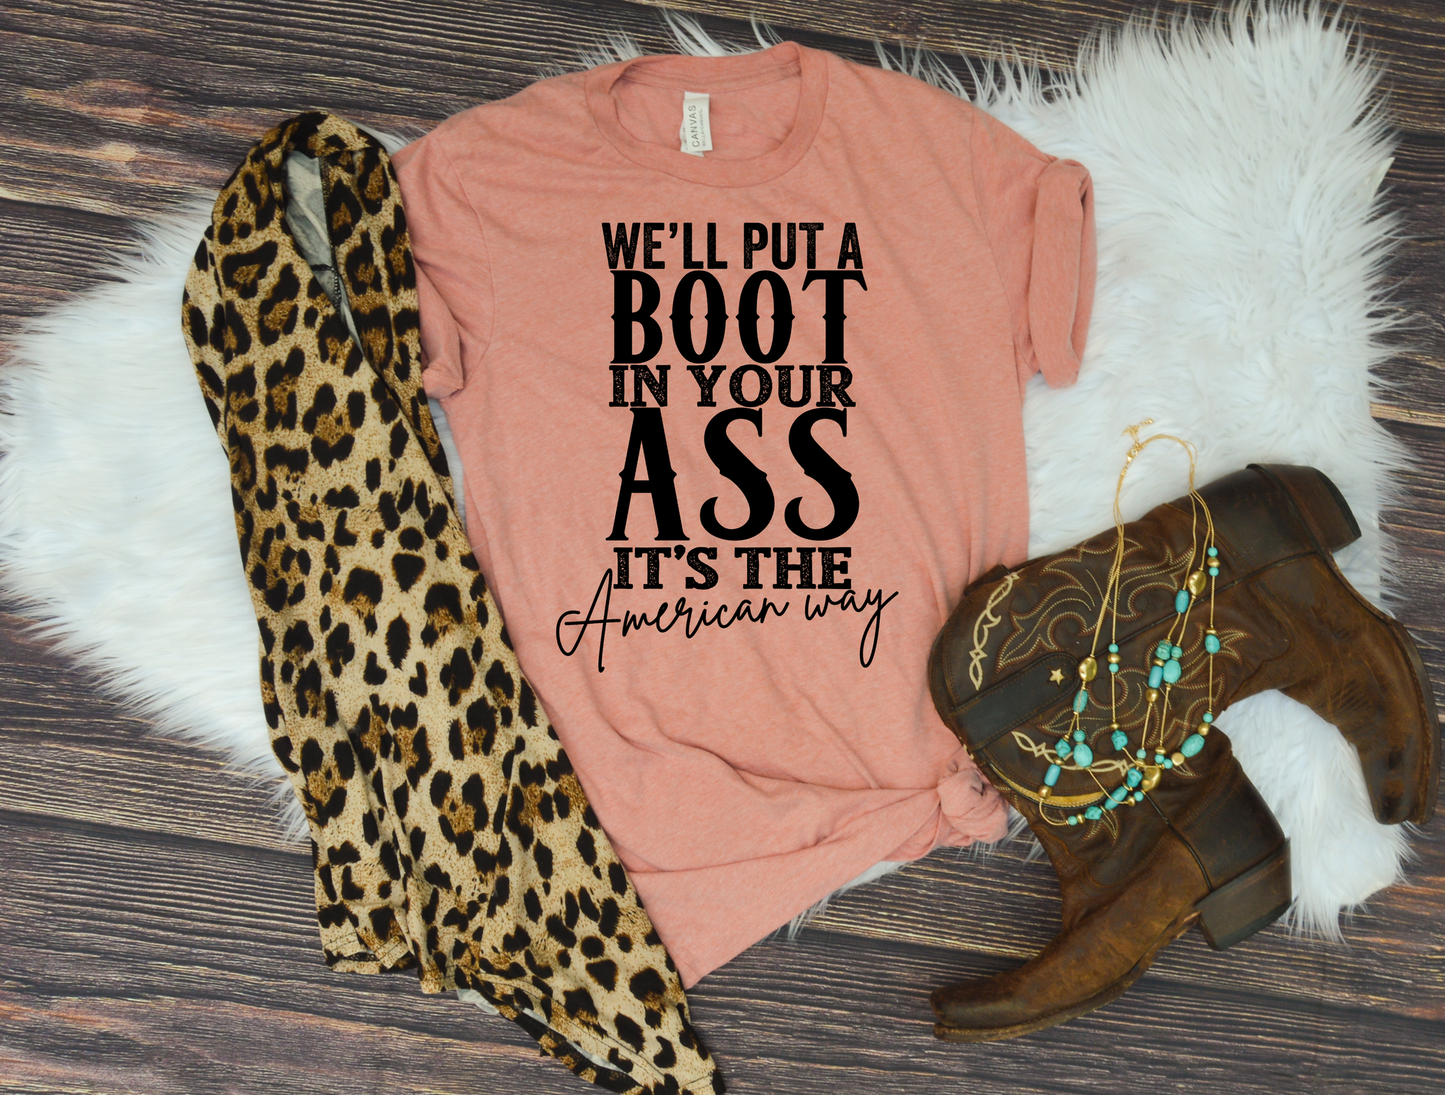 We'll put a boot in your ass, its the American way women's top